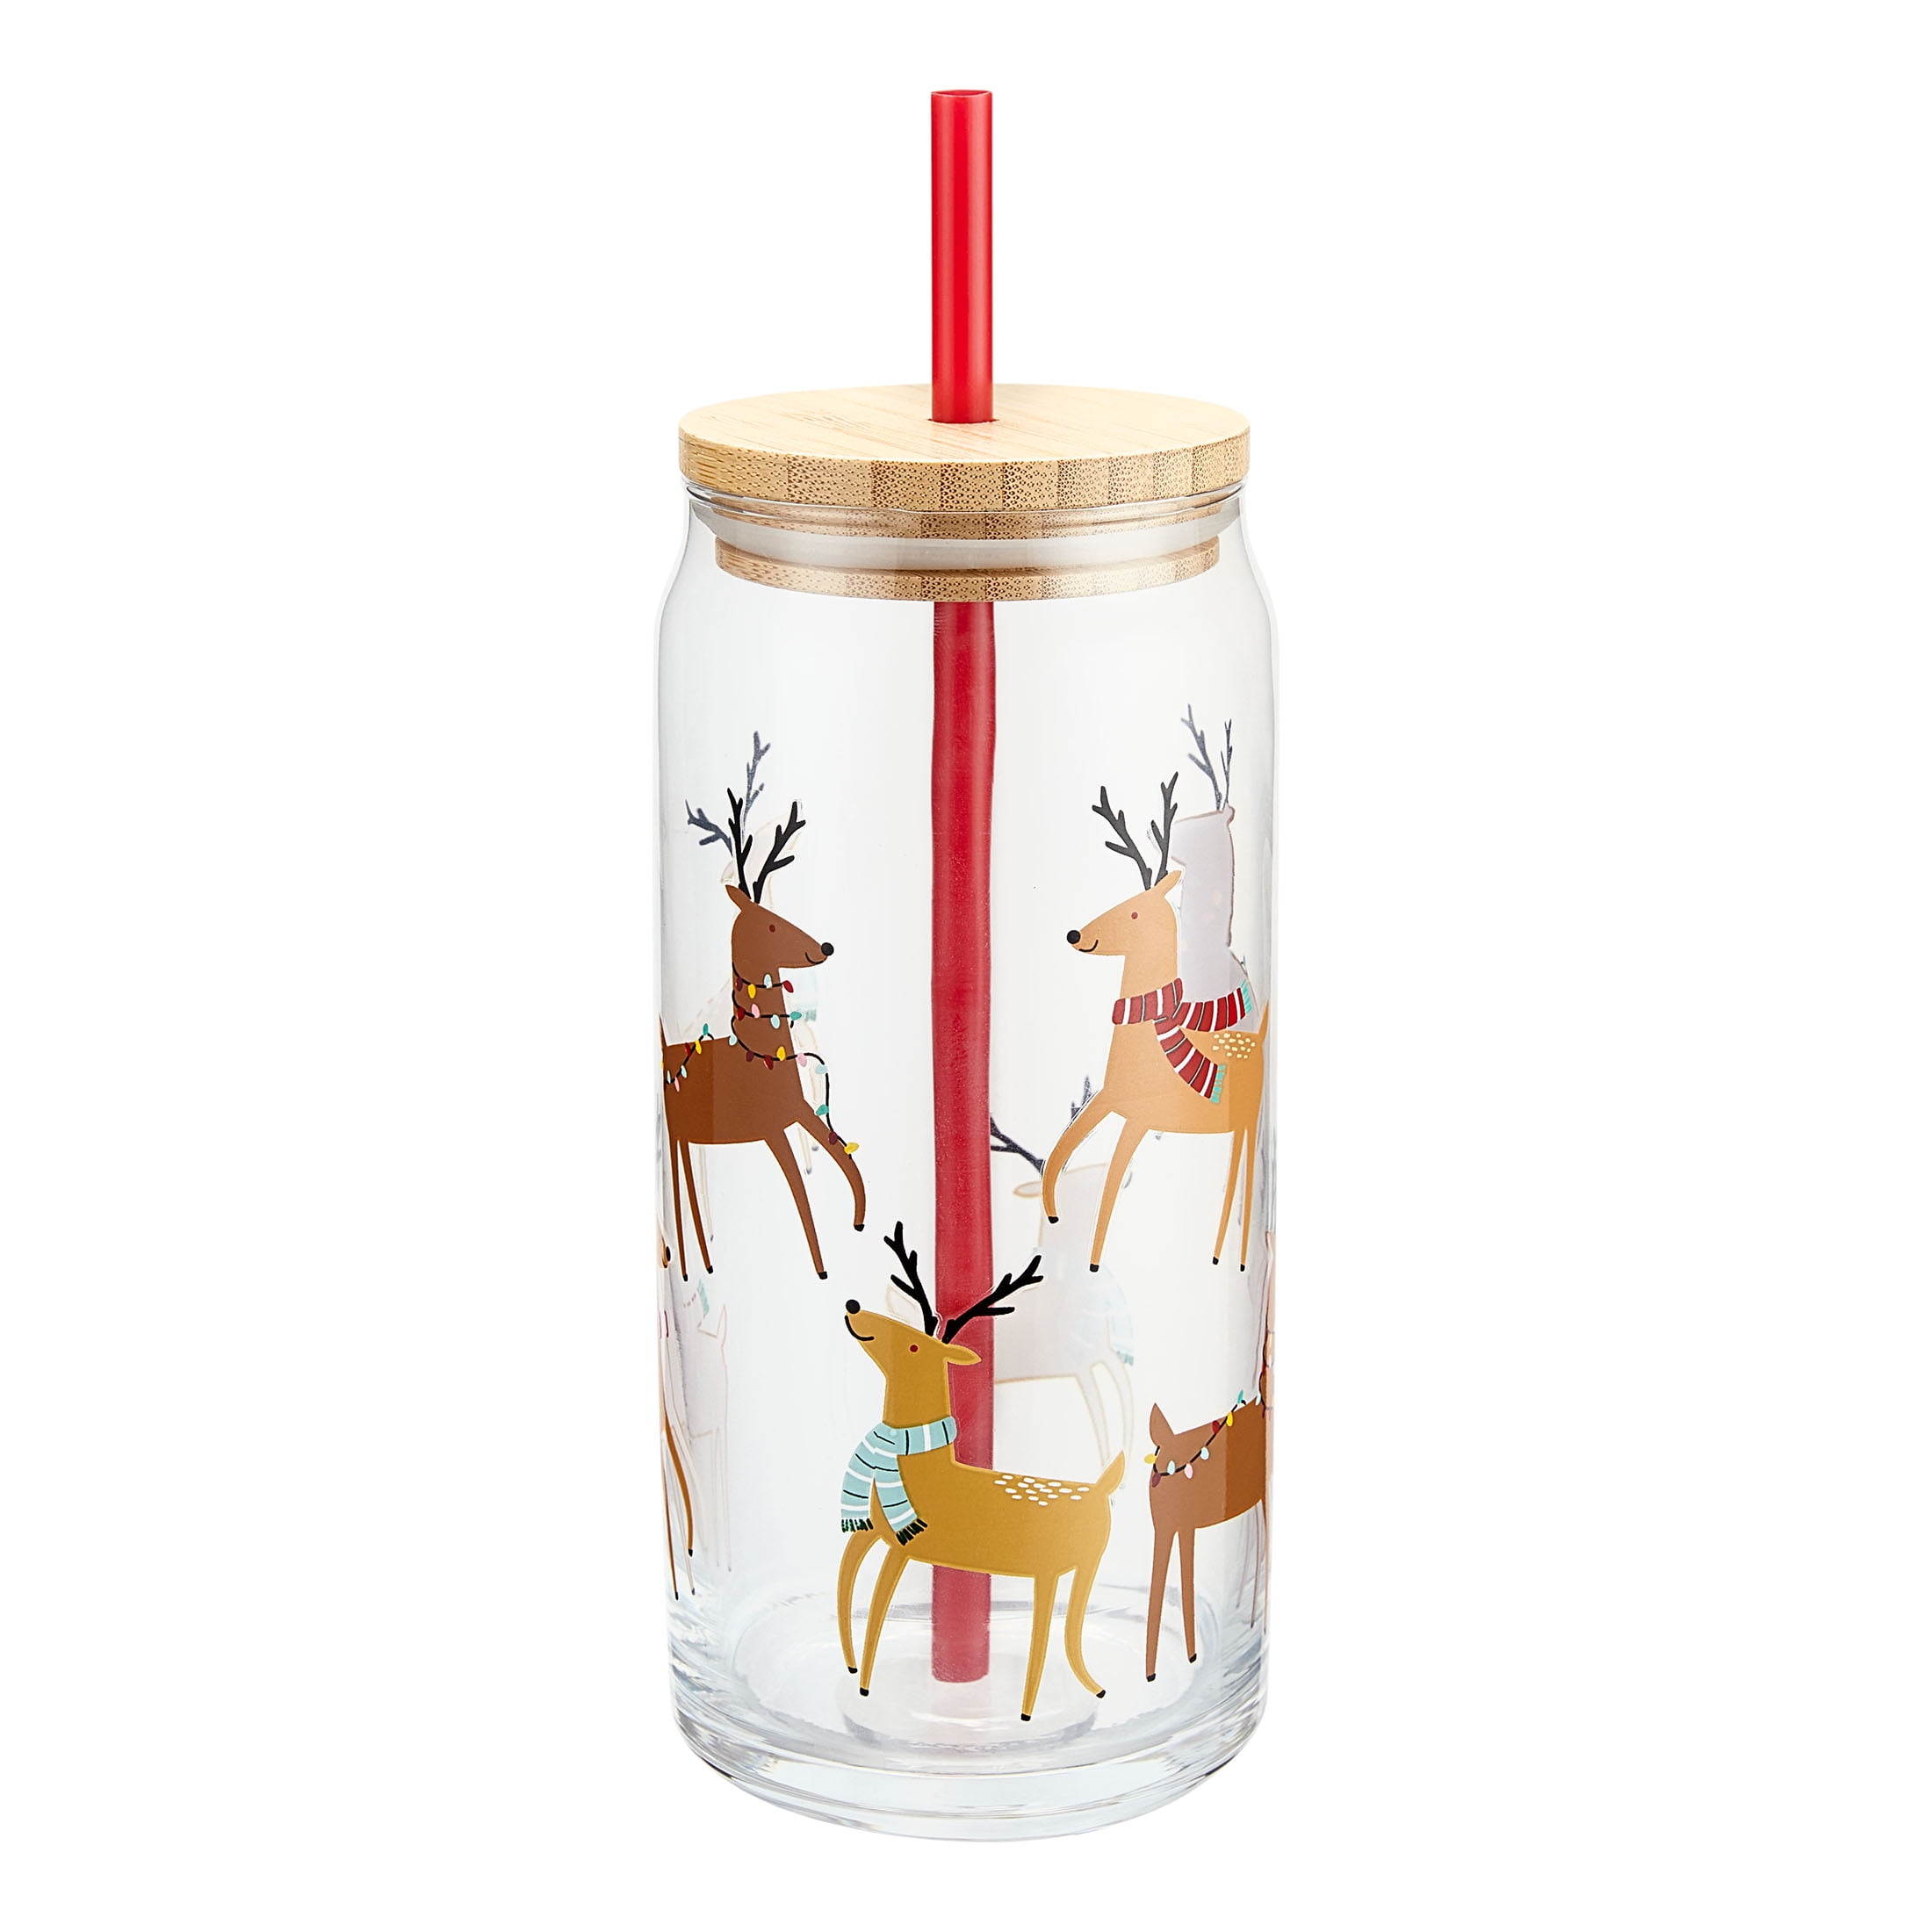 Set of 12 Christmas Tall Drinking Glasses - household items - by